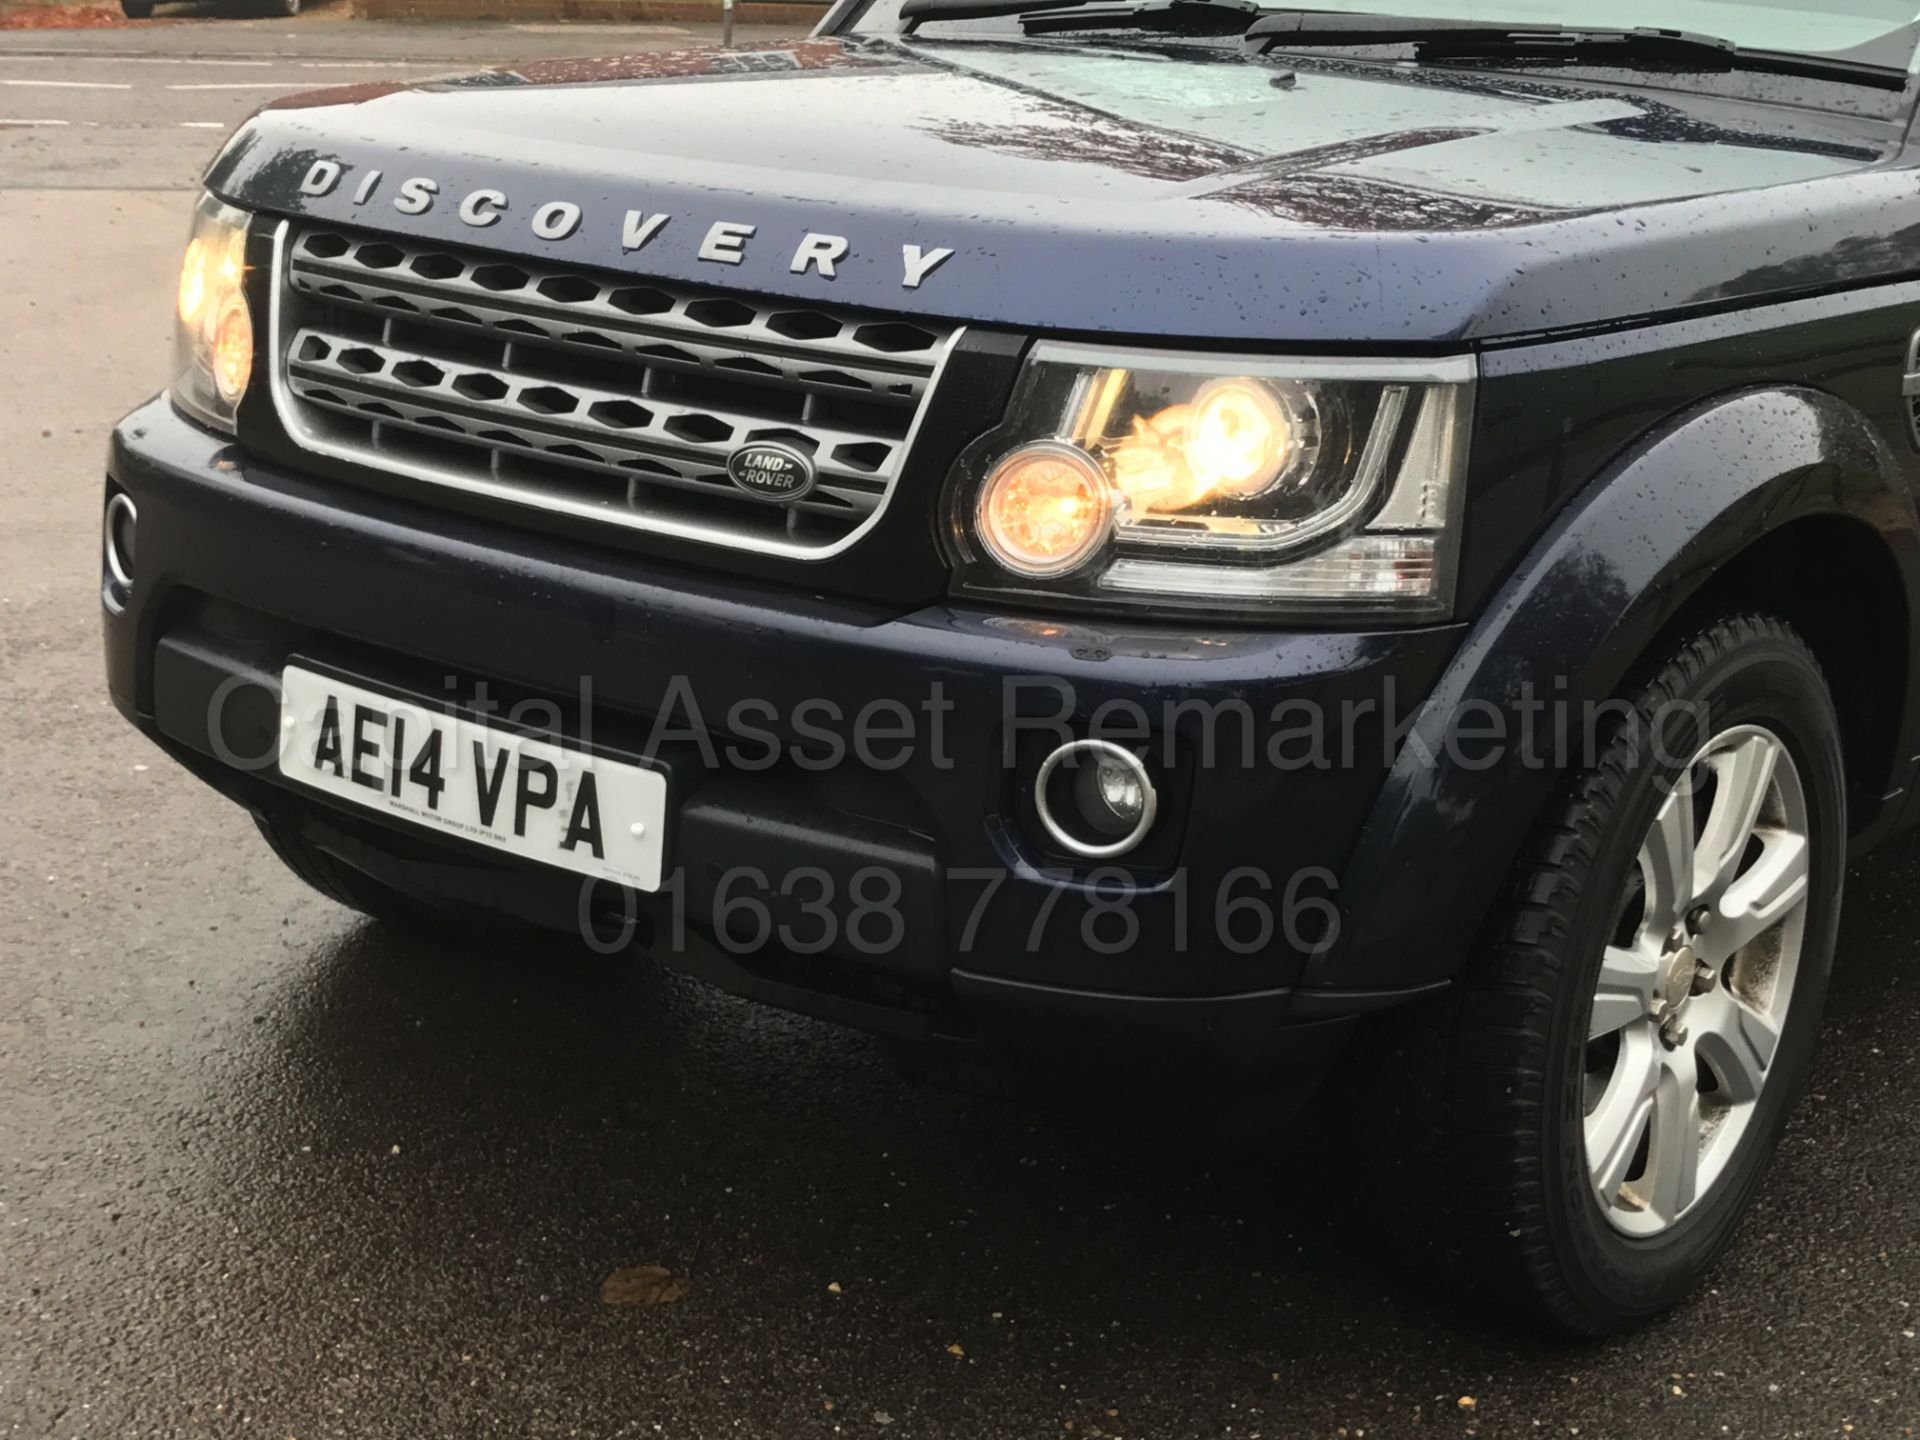 ON SALE LAND ROVER DISCOVERY 4 (2014) '3.0 SDV6 - 8 SPEED AUTO - LEATHER - SAT NAV -7 SEATER'1 OWNER - Image 12 of 41